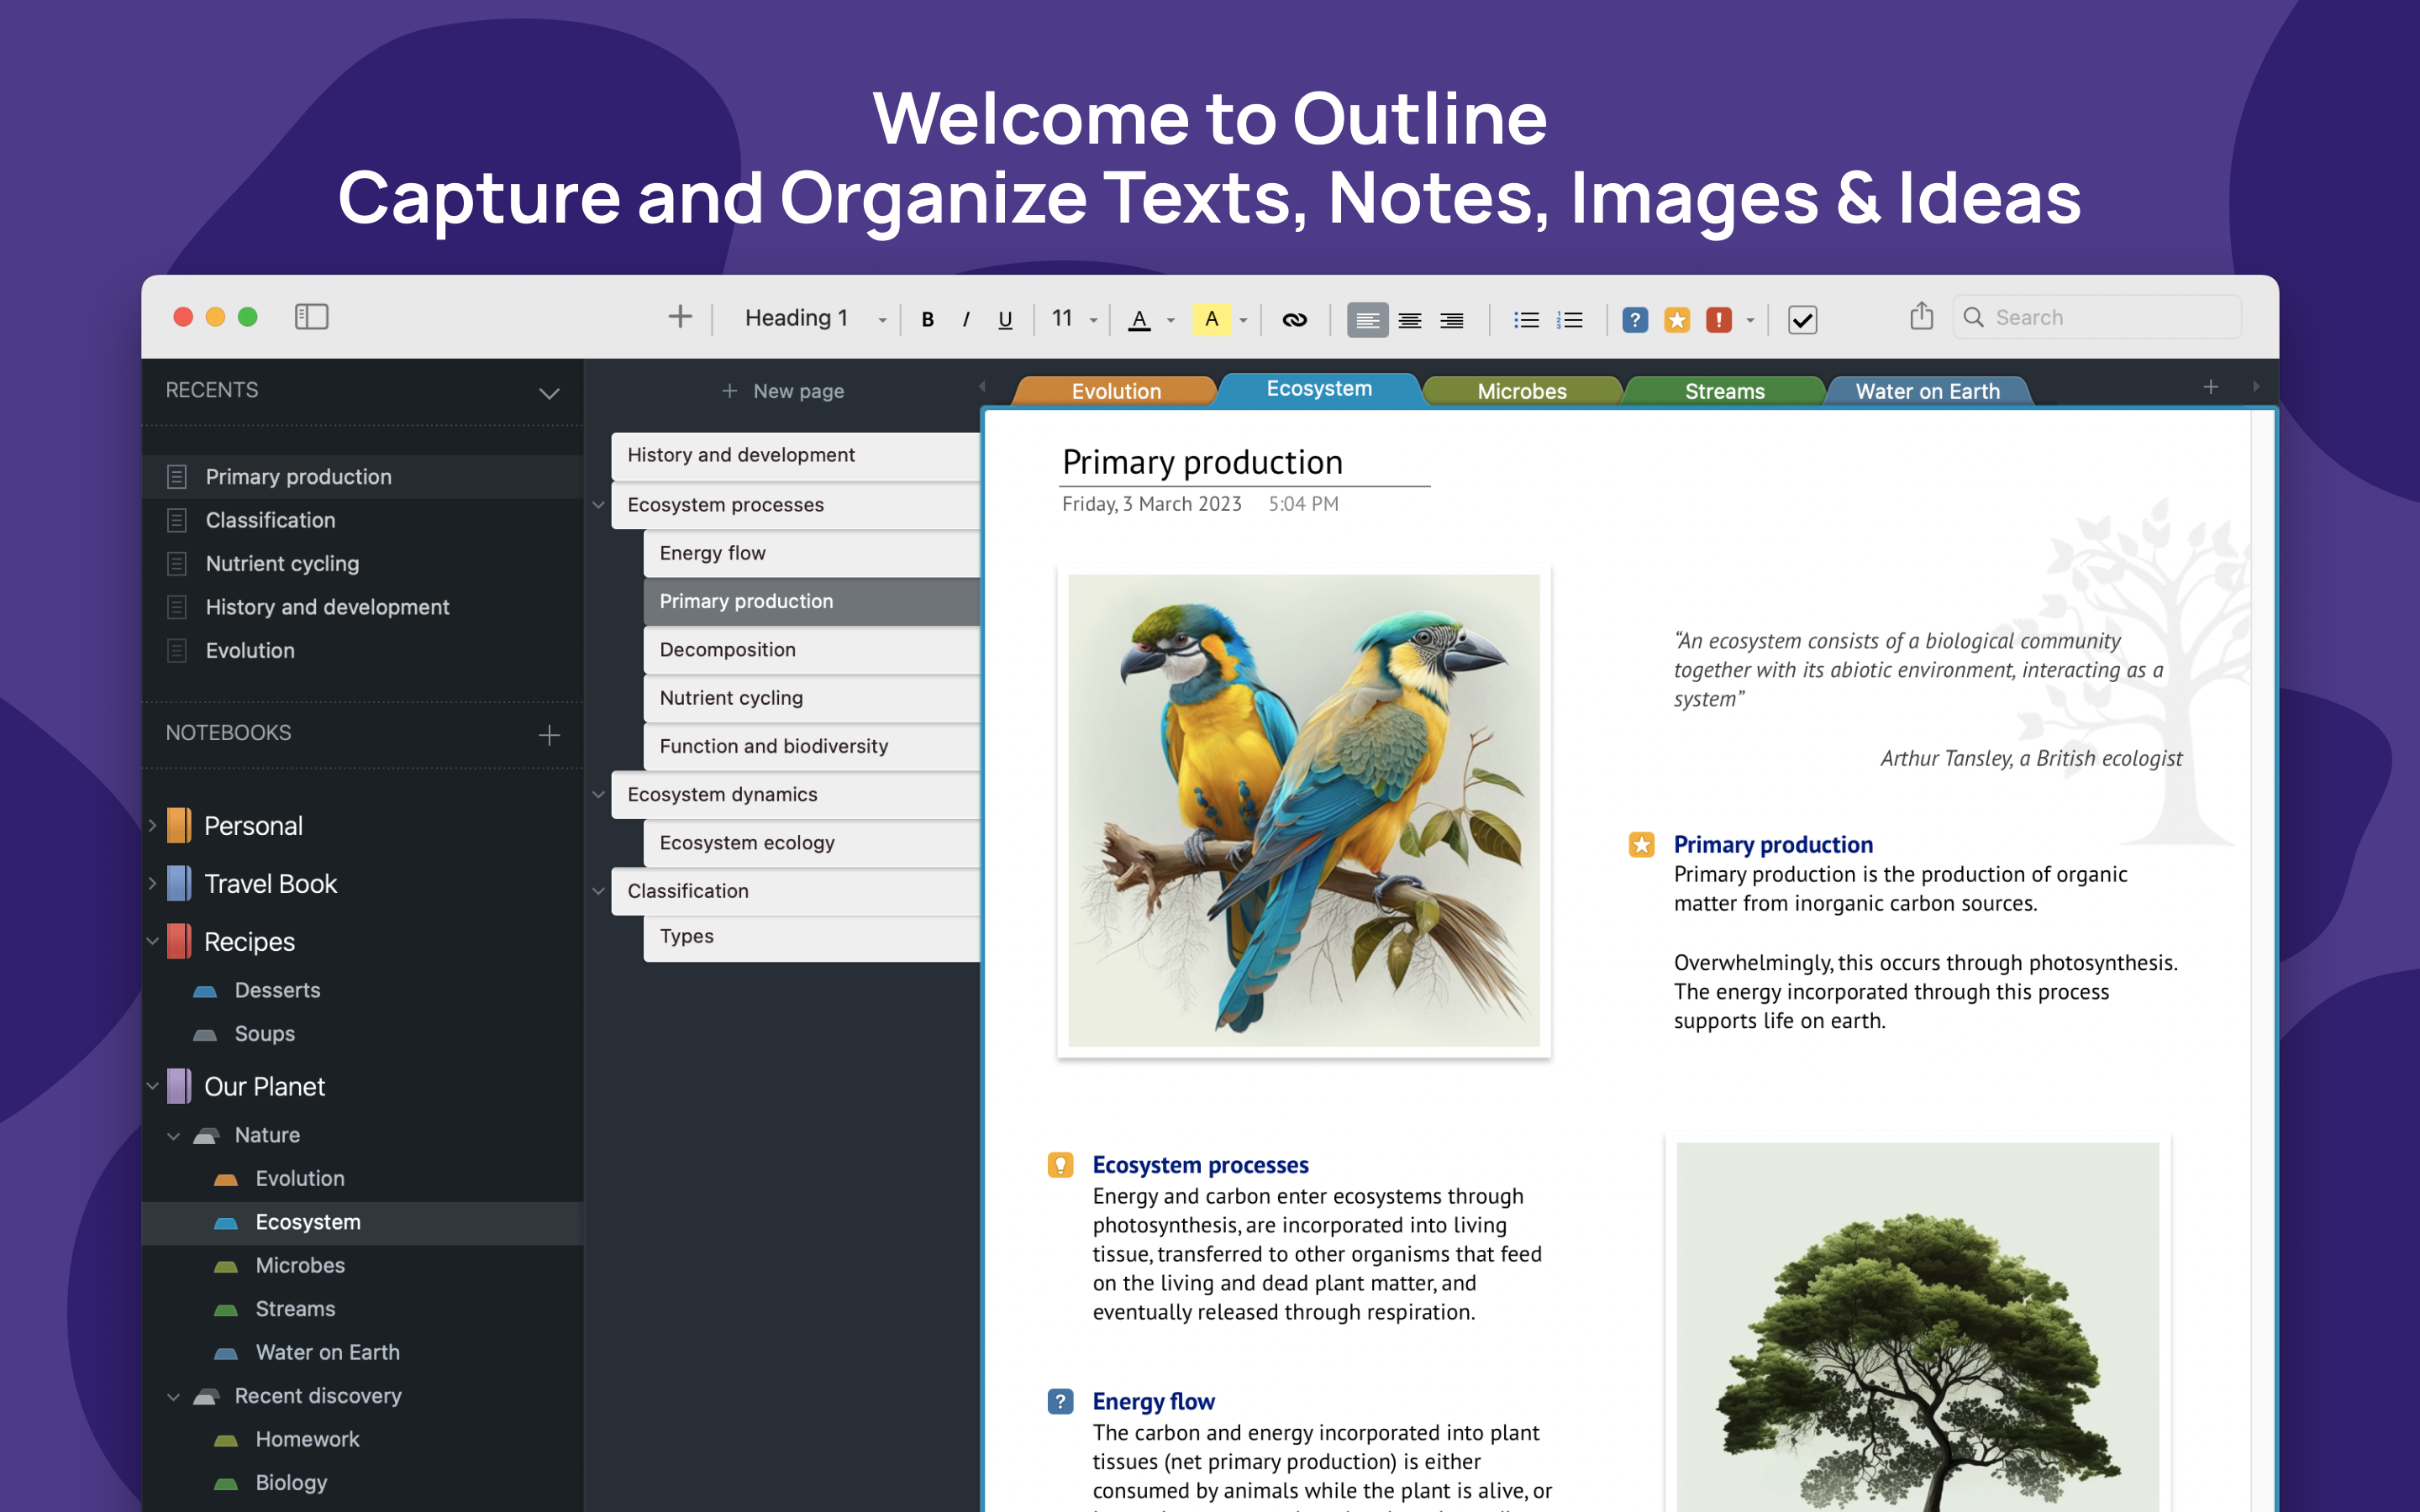 Capture and Organize Texts, Notes, Images & Ideas